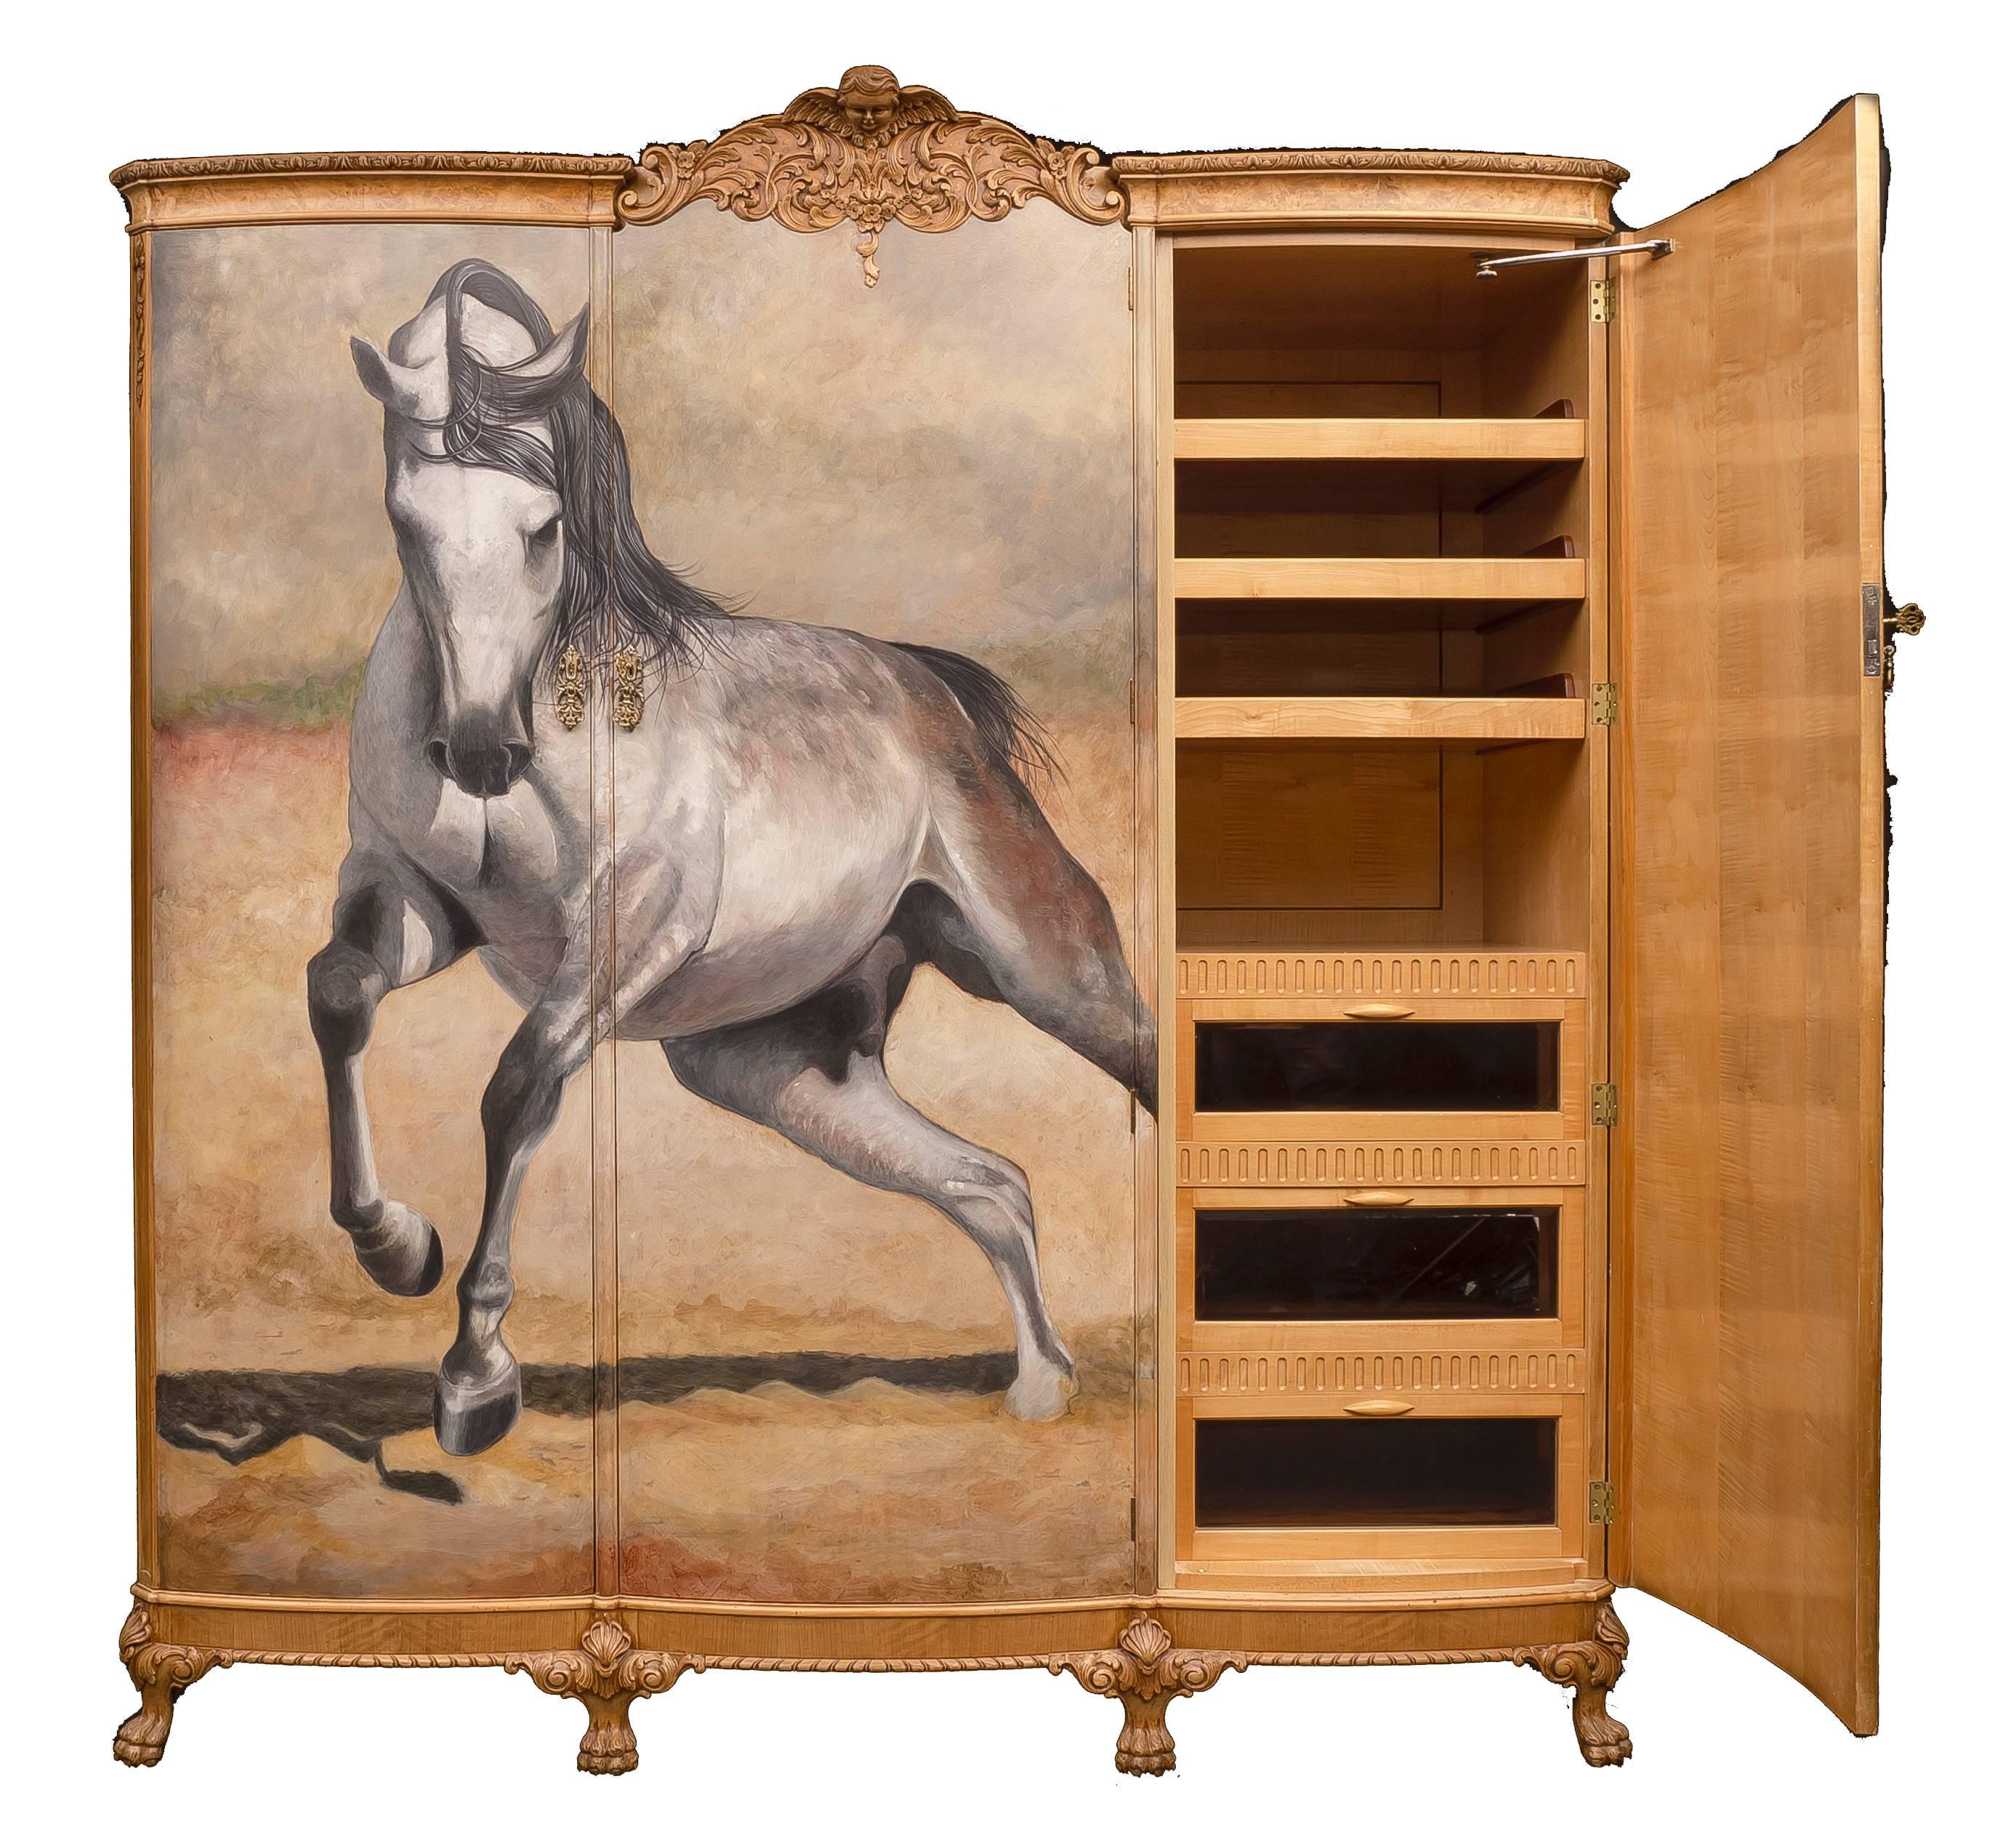 This wardrobe has been refurbished to a very high standard and hand-painted by Kensa Designs. The majestic stallion adds a raw and bold appeal to this antique wardrobe manufactured in the 1920s by Beresford and Hicks of London.
A stunning wardrobe